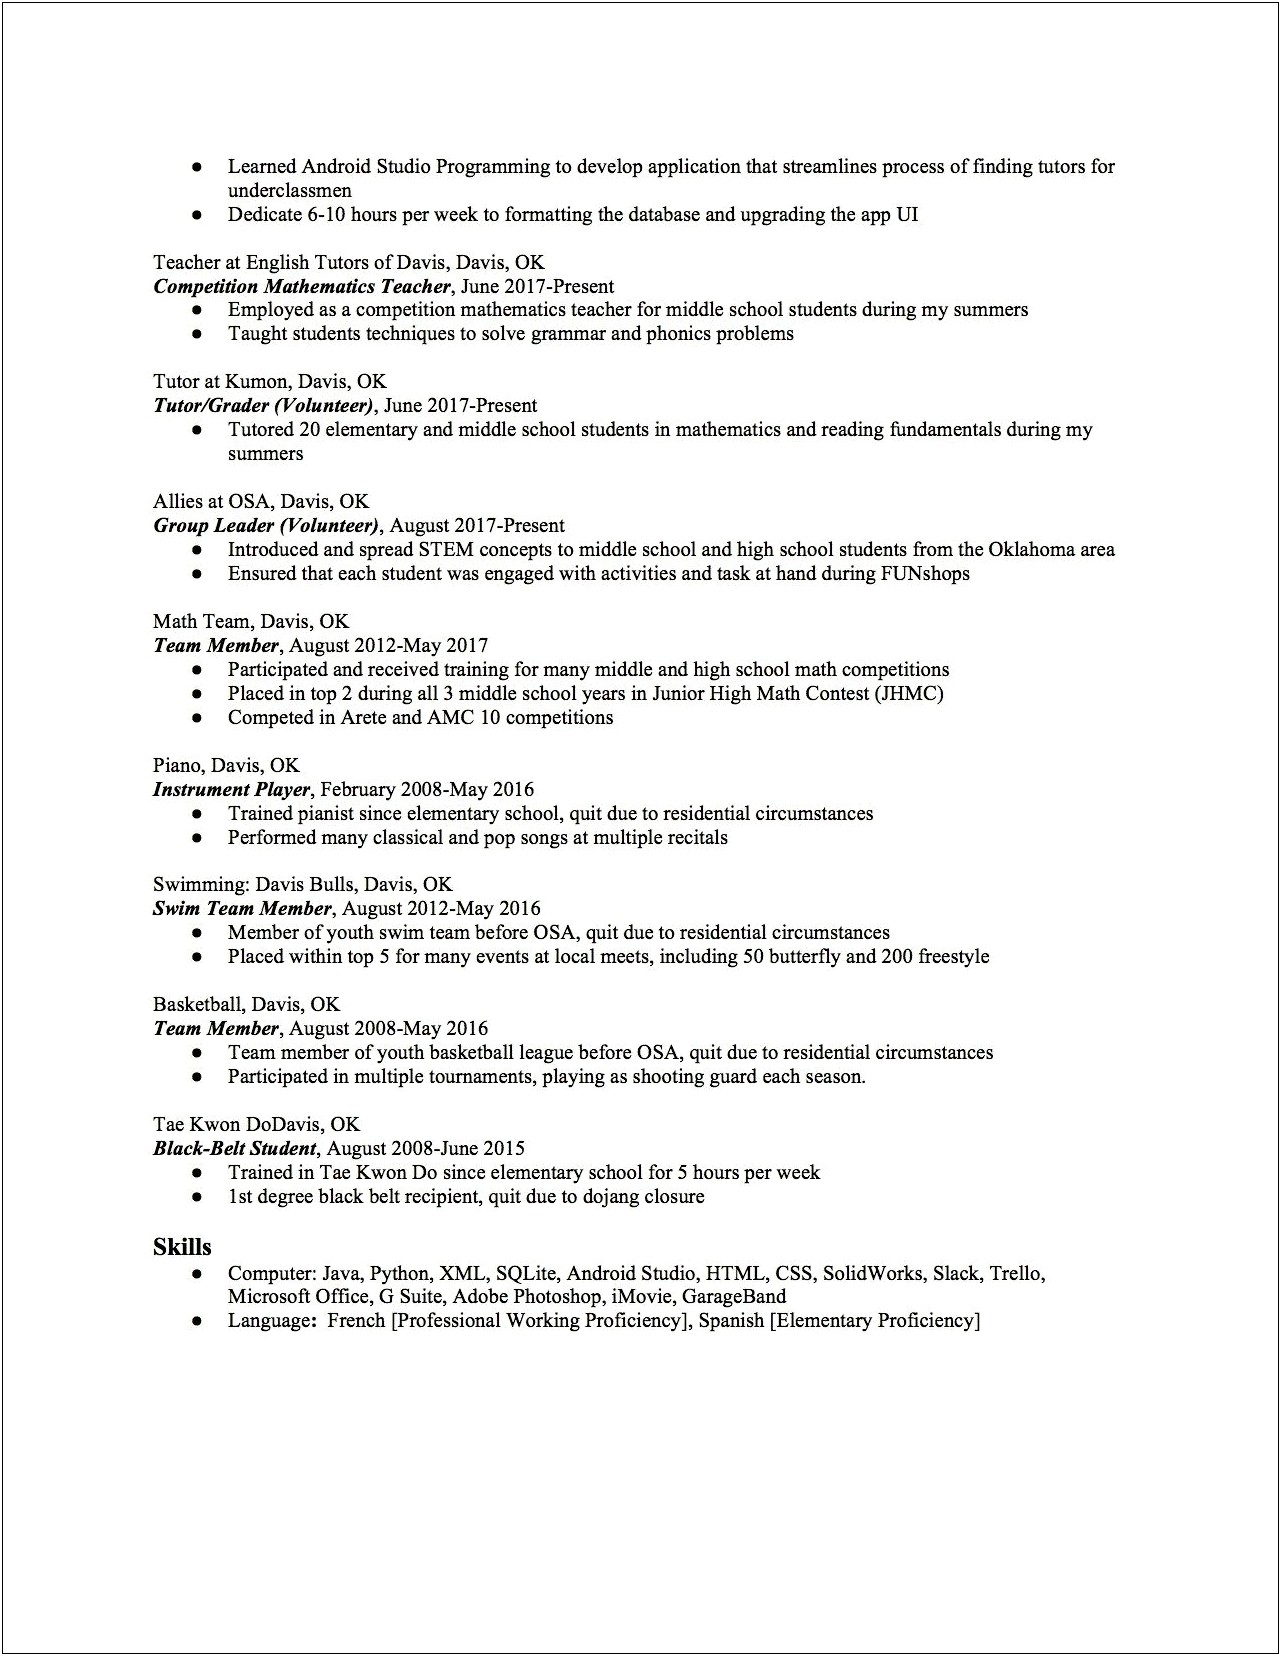 Sample Ivy League Student Resume